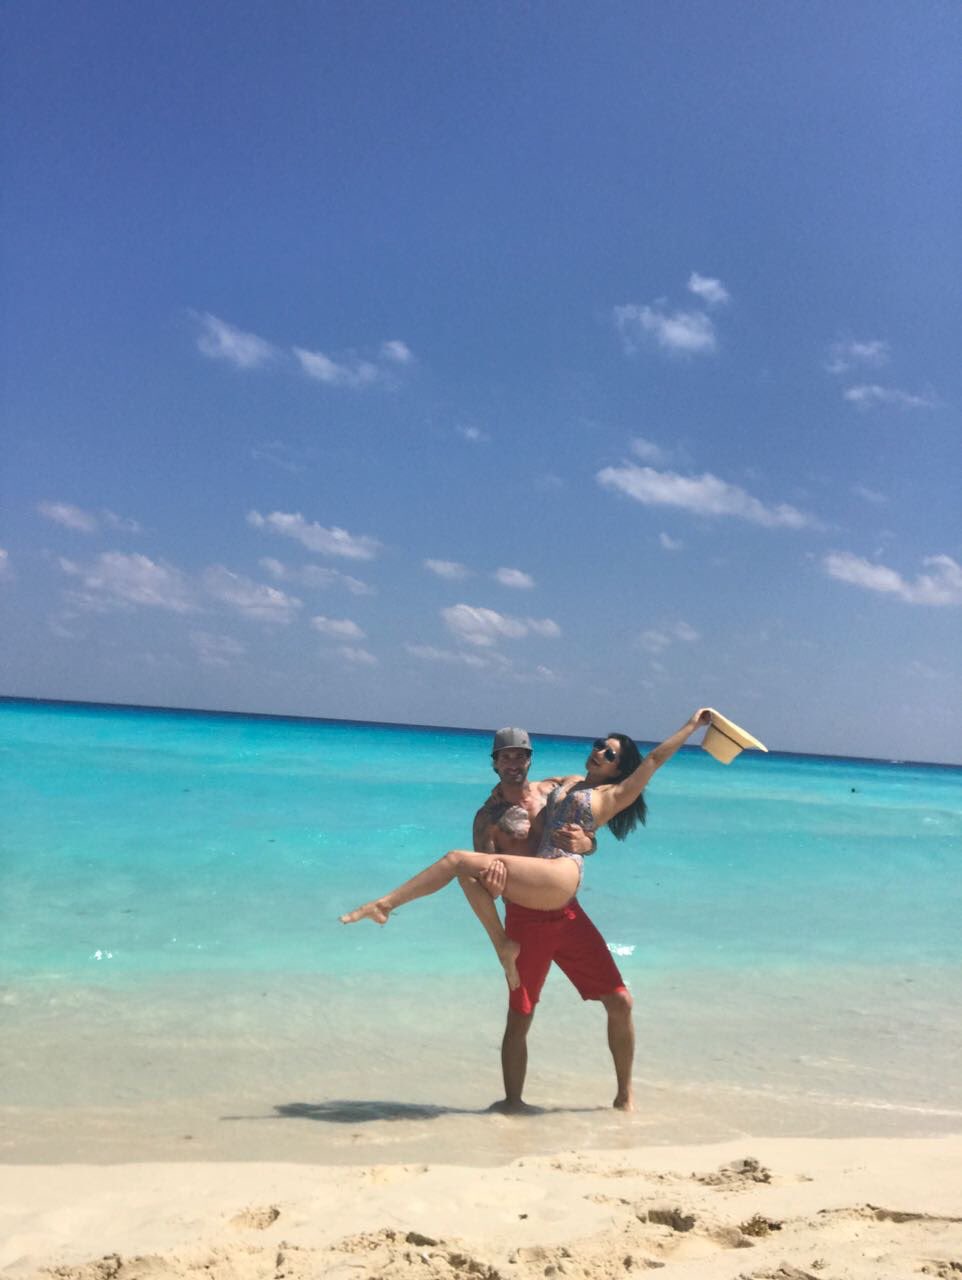 1 pic. Last day on the beach with @DanielWeber99 Cancun Mexico!! https://t.co/RnYQoc085j